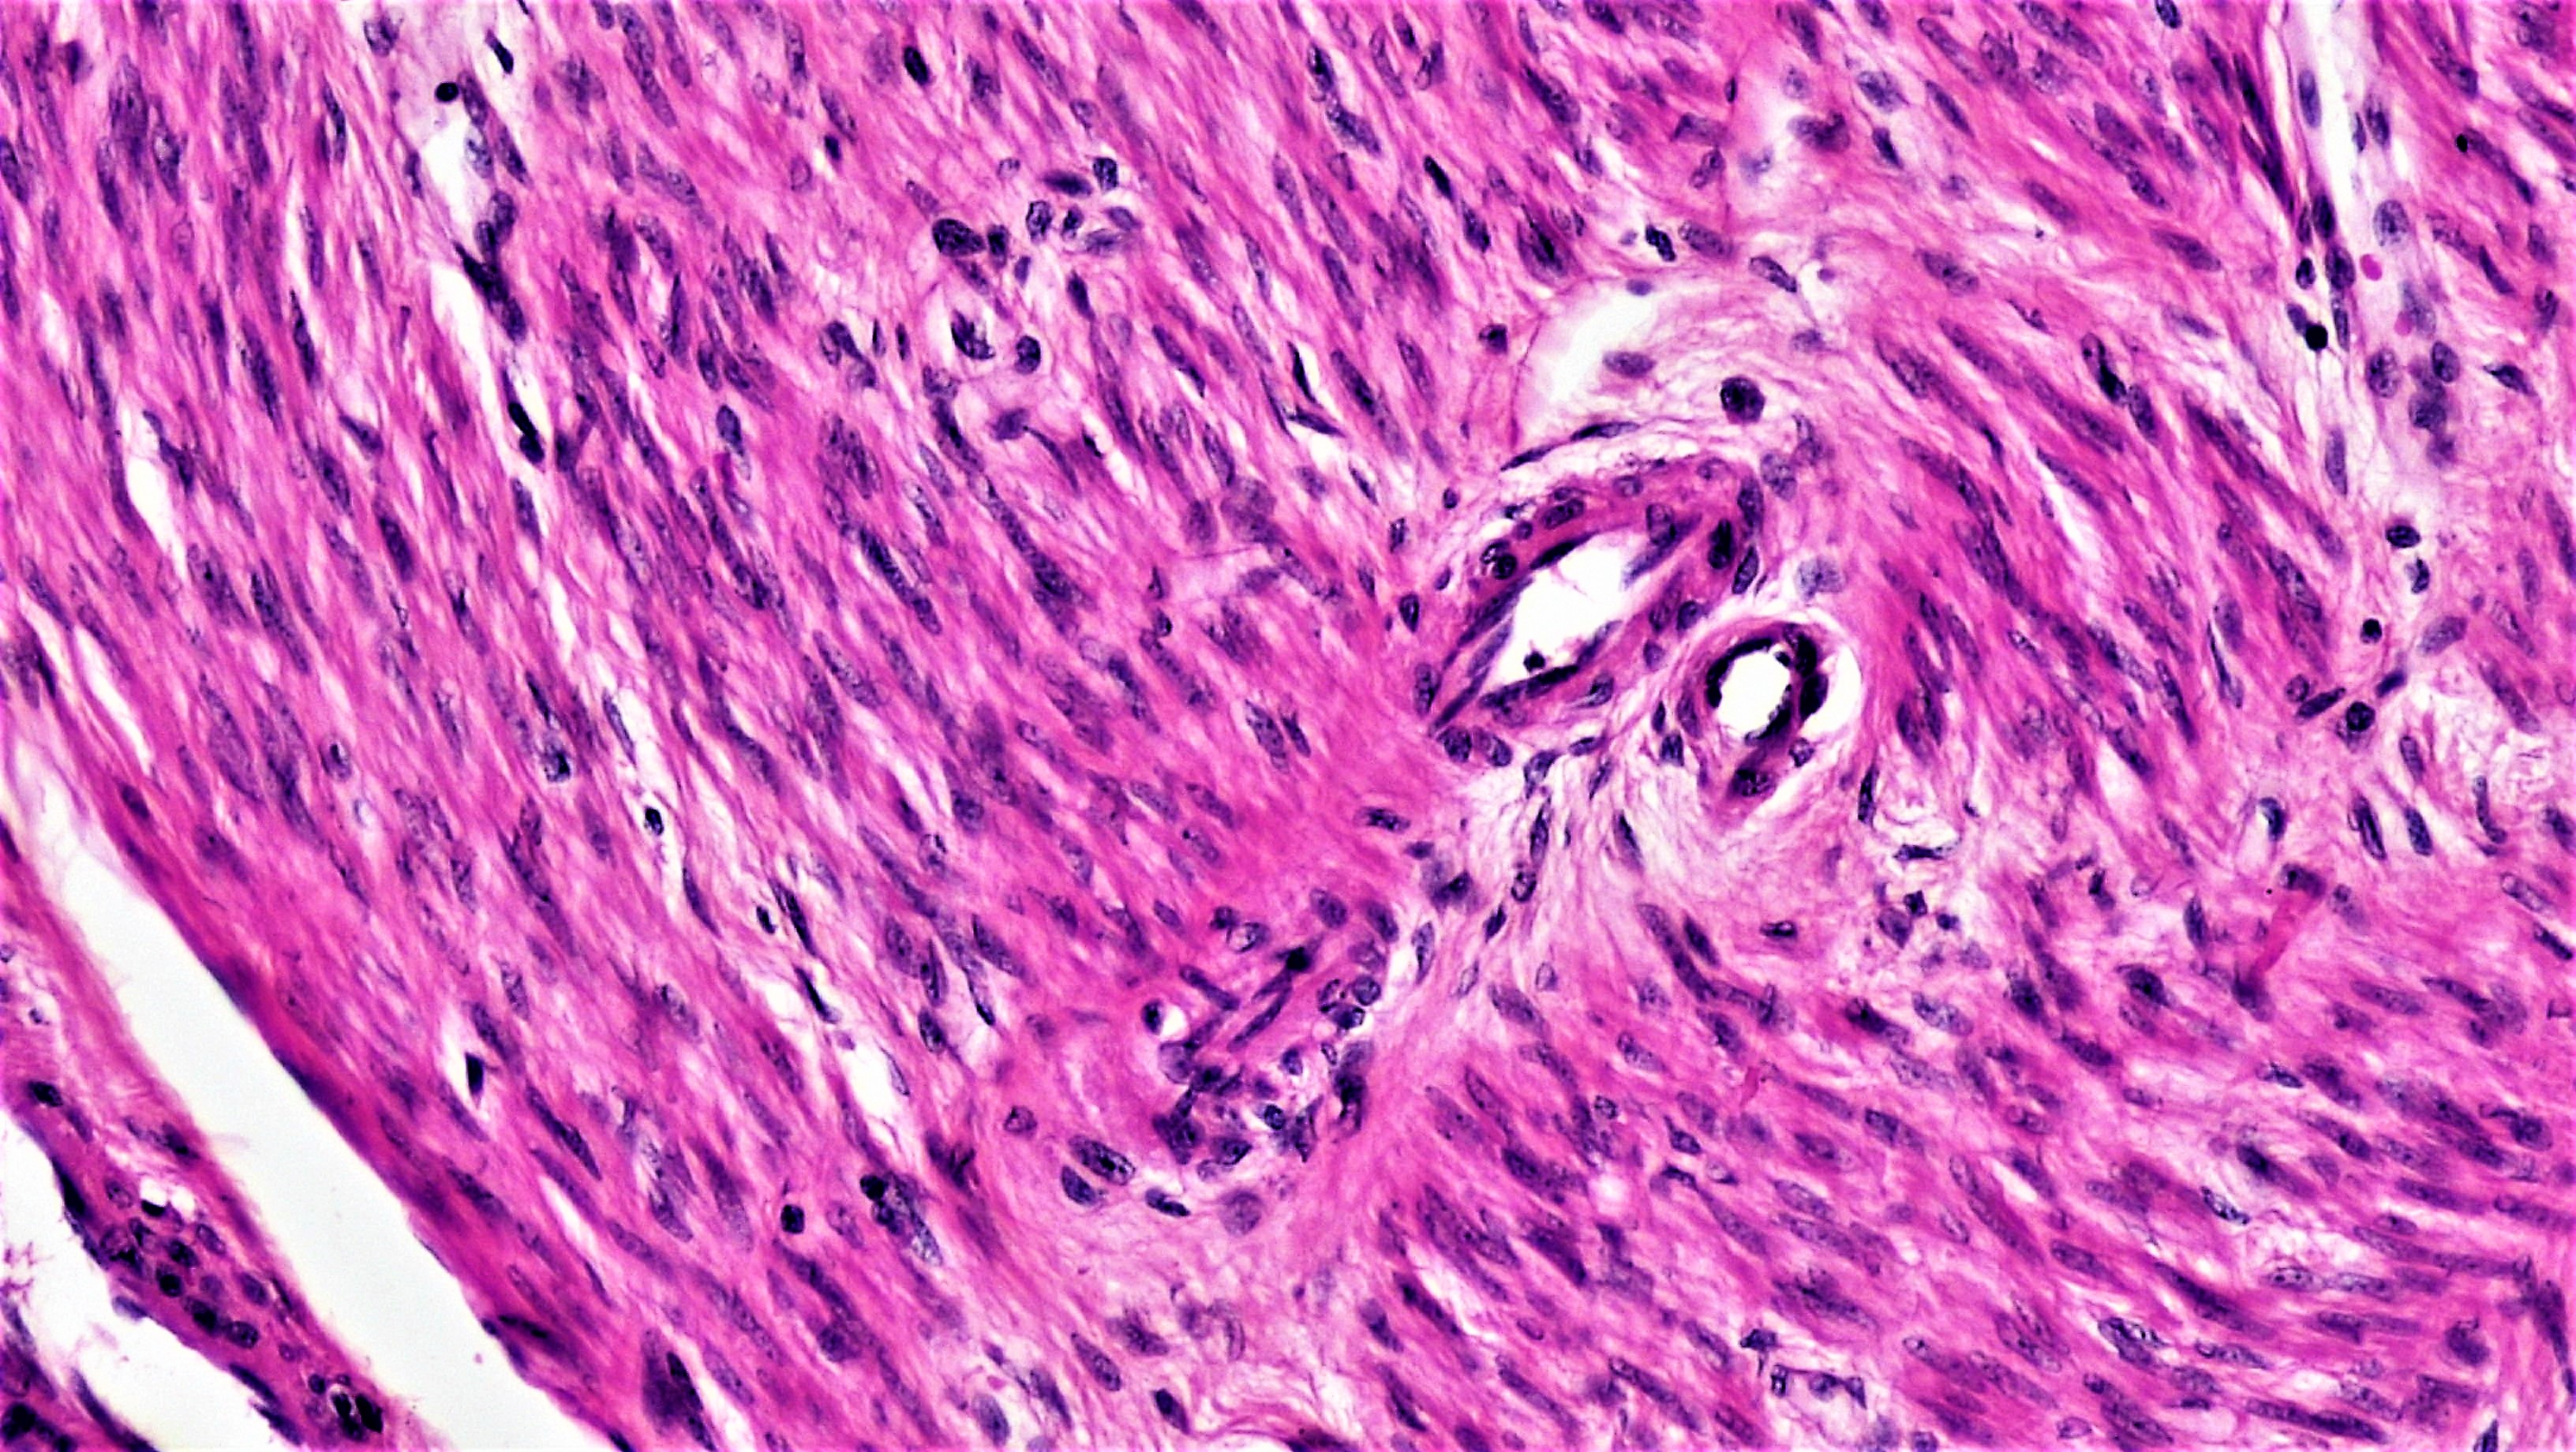 Microscope image of muscle tissue. The many individual muscle cells that make it up can be seen.